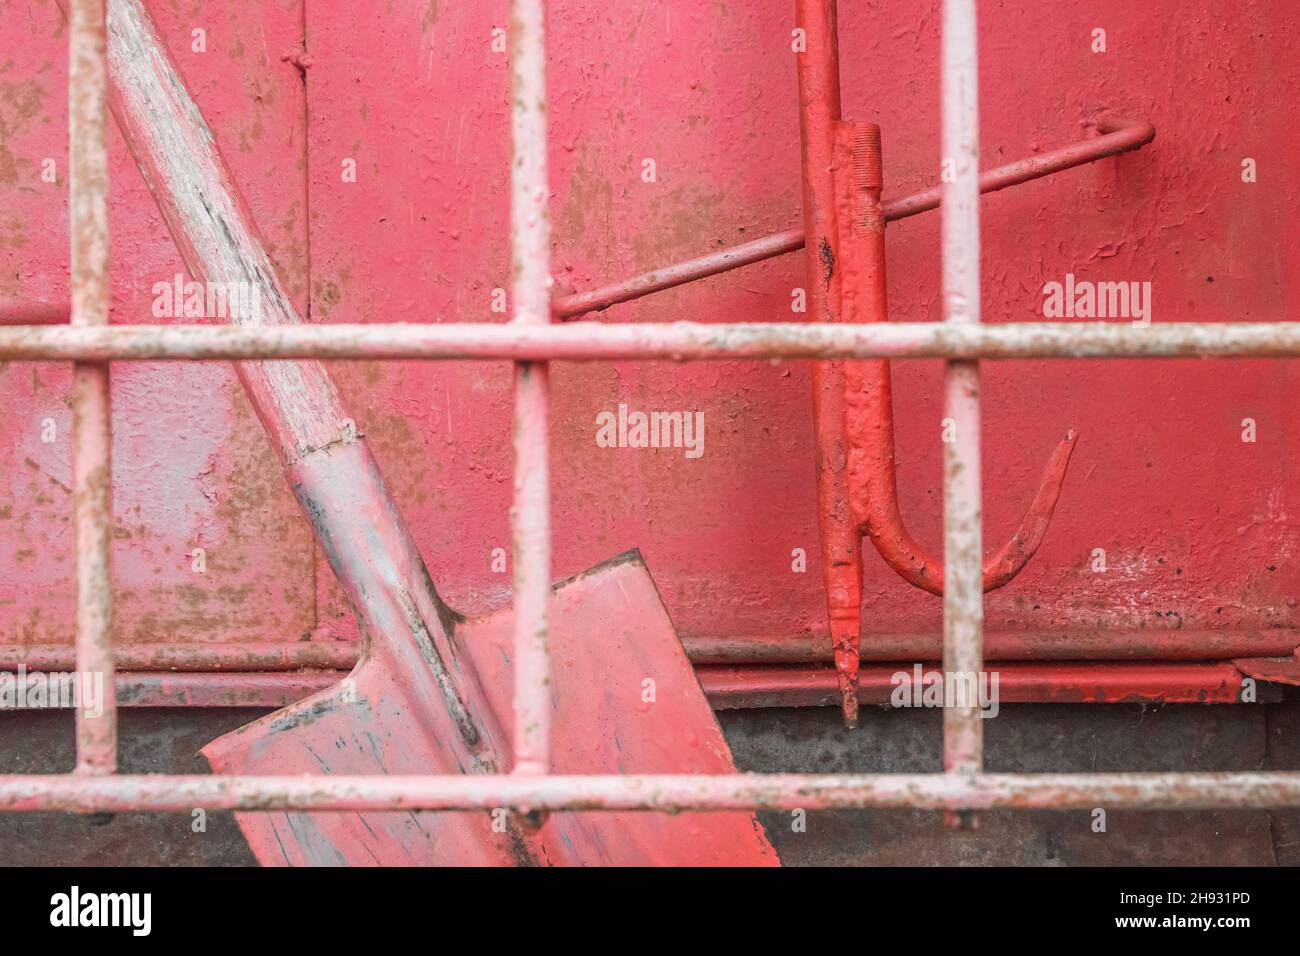 Old red fire shovel equipment and tools to help safely extinguish fire. Stock Photo